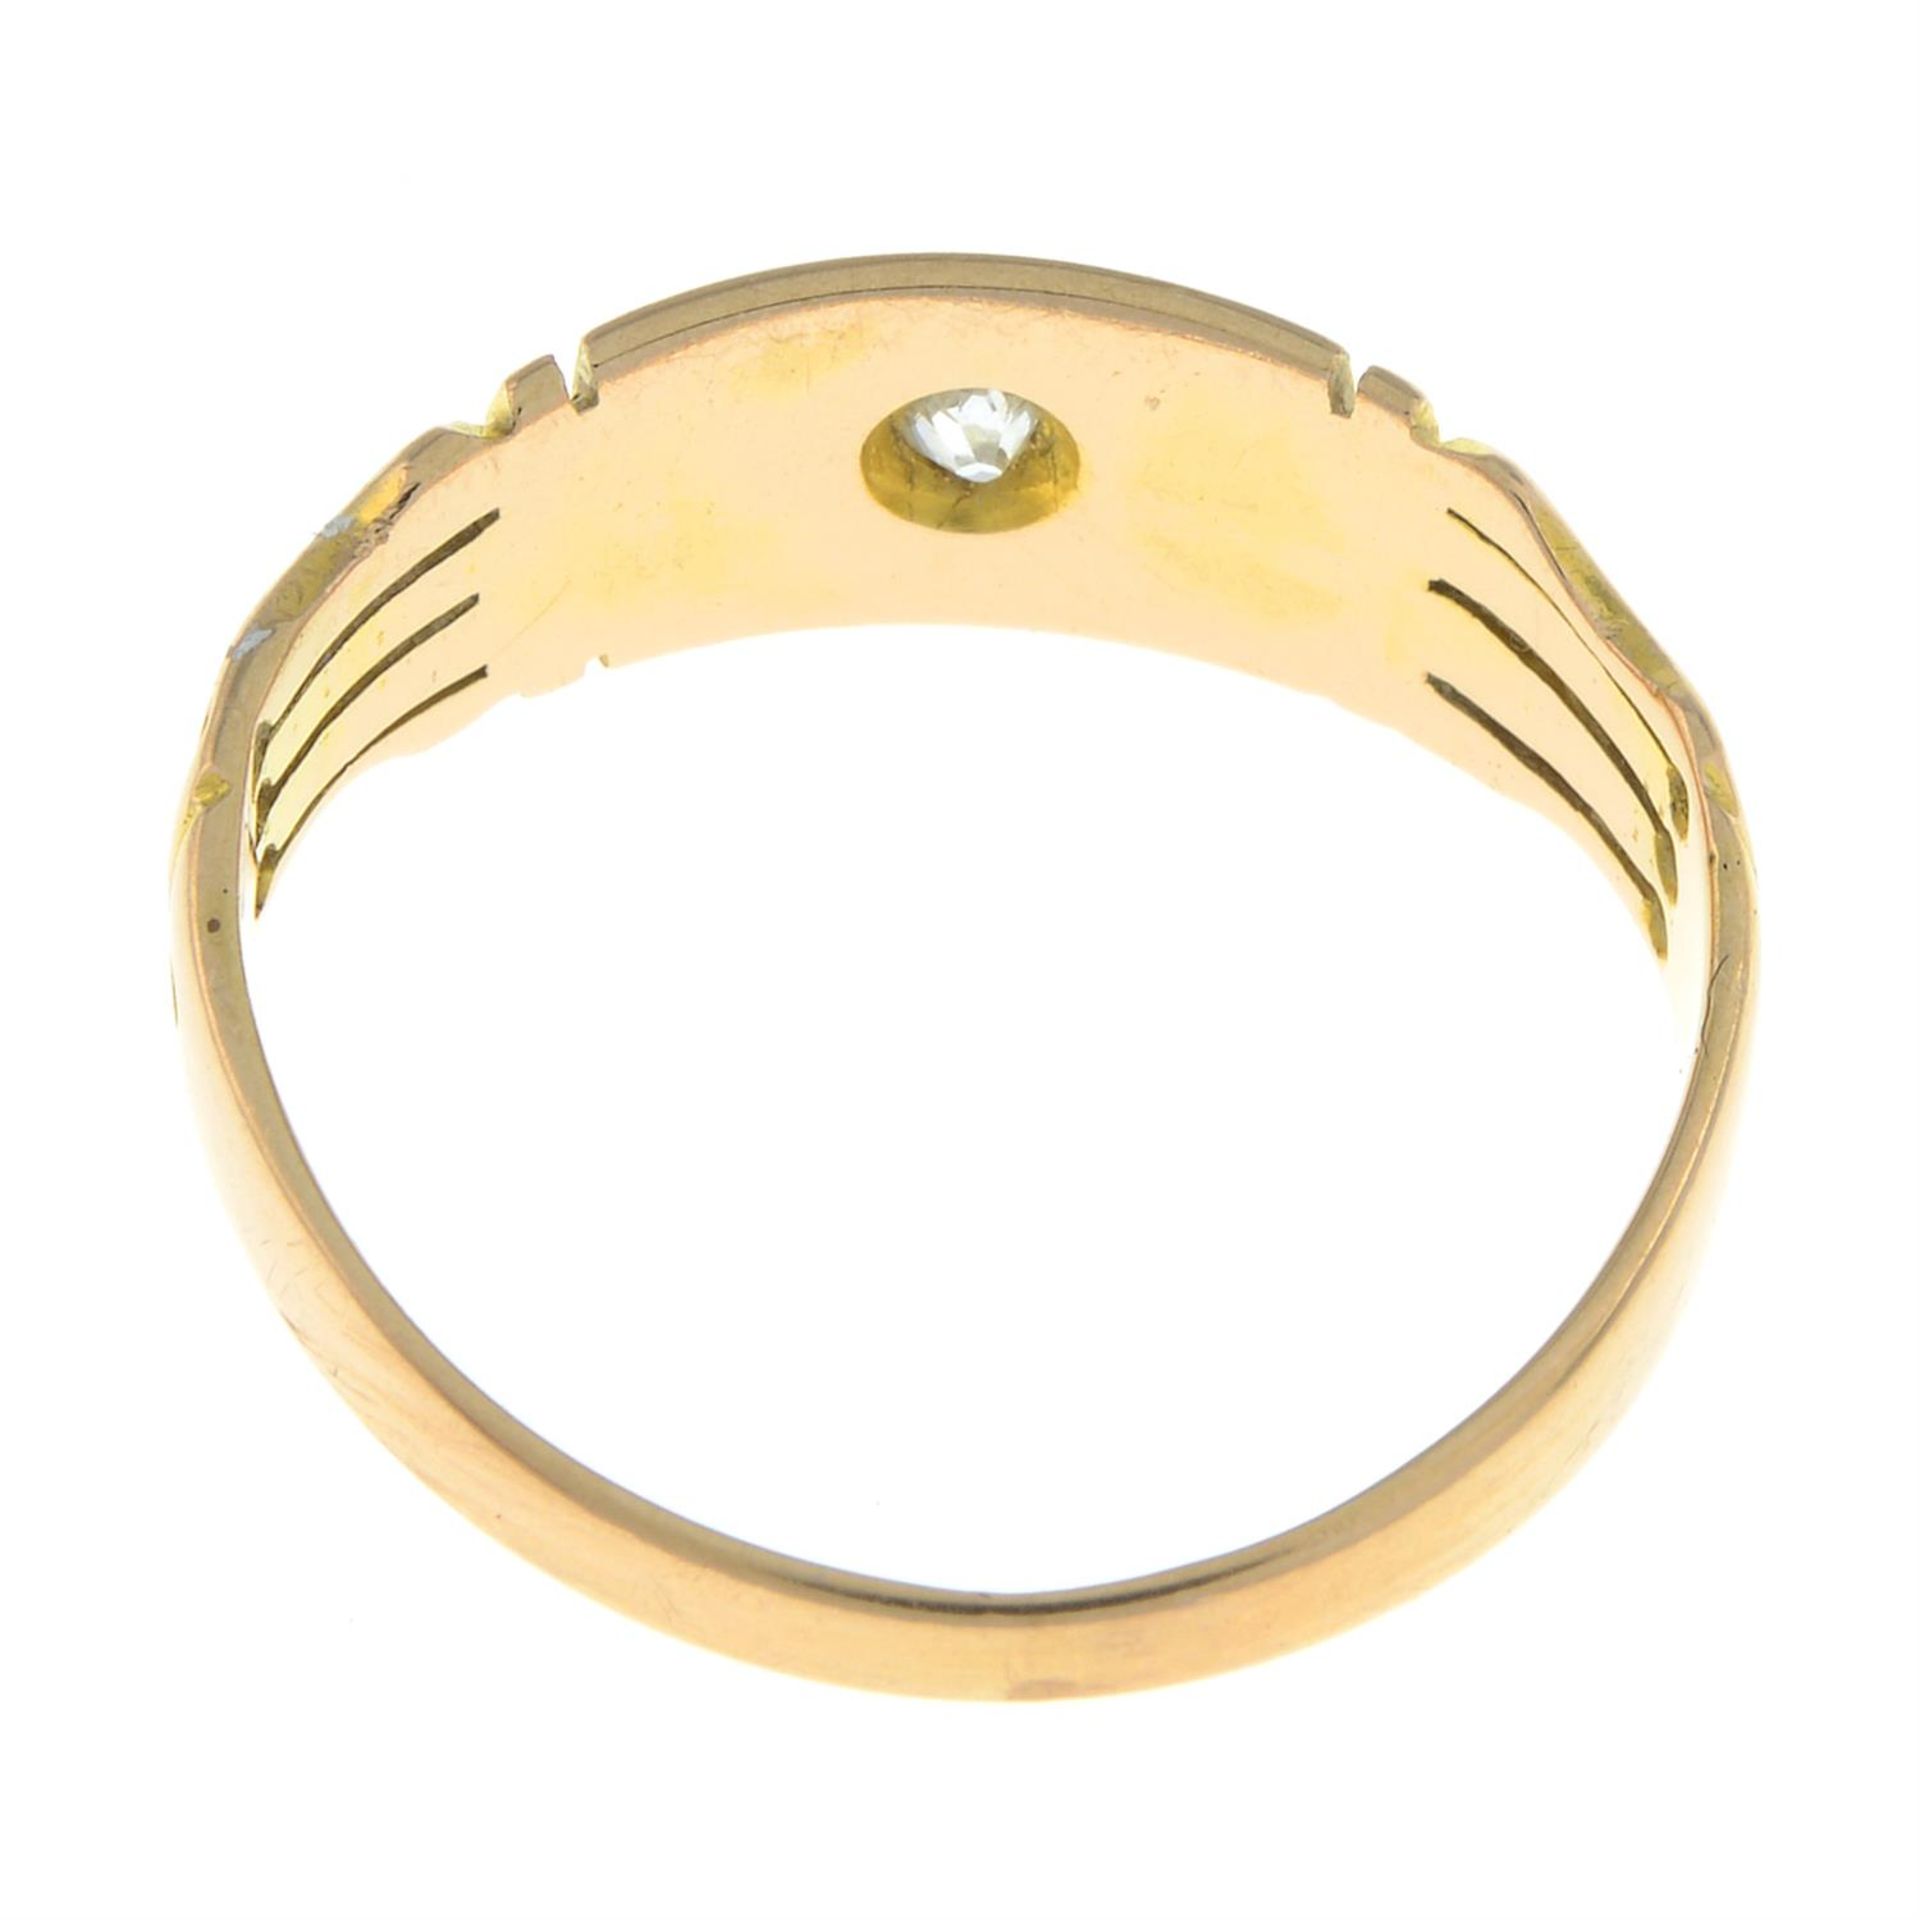 15ct gold diamond accent ring - Image 2 of 2